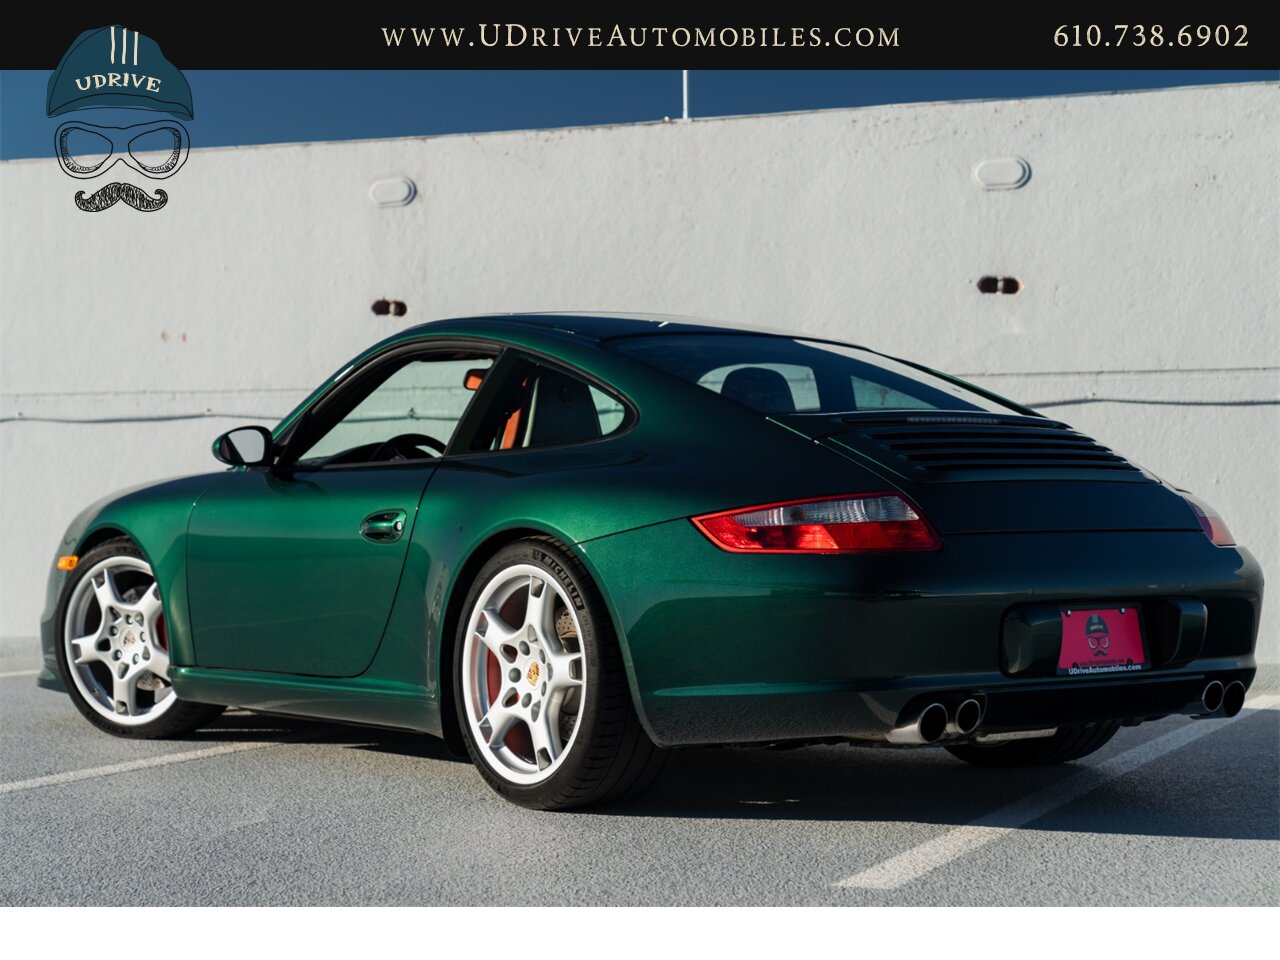 2007 Porsche 911 Carrera S 6Spd 997S RARE X51 Power Kit 381hp  1 of a Kind Forest Green over Blk/Terracotta Chrono Adap Sport Sts $113k MSRP - Photo 5 - West Chester, PA 19382